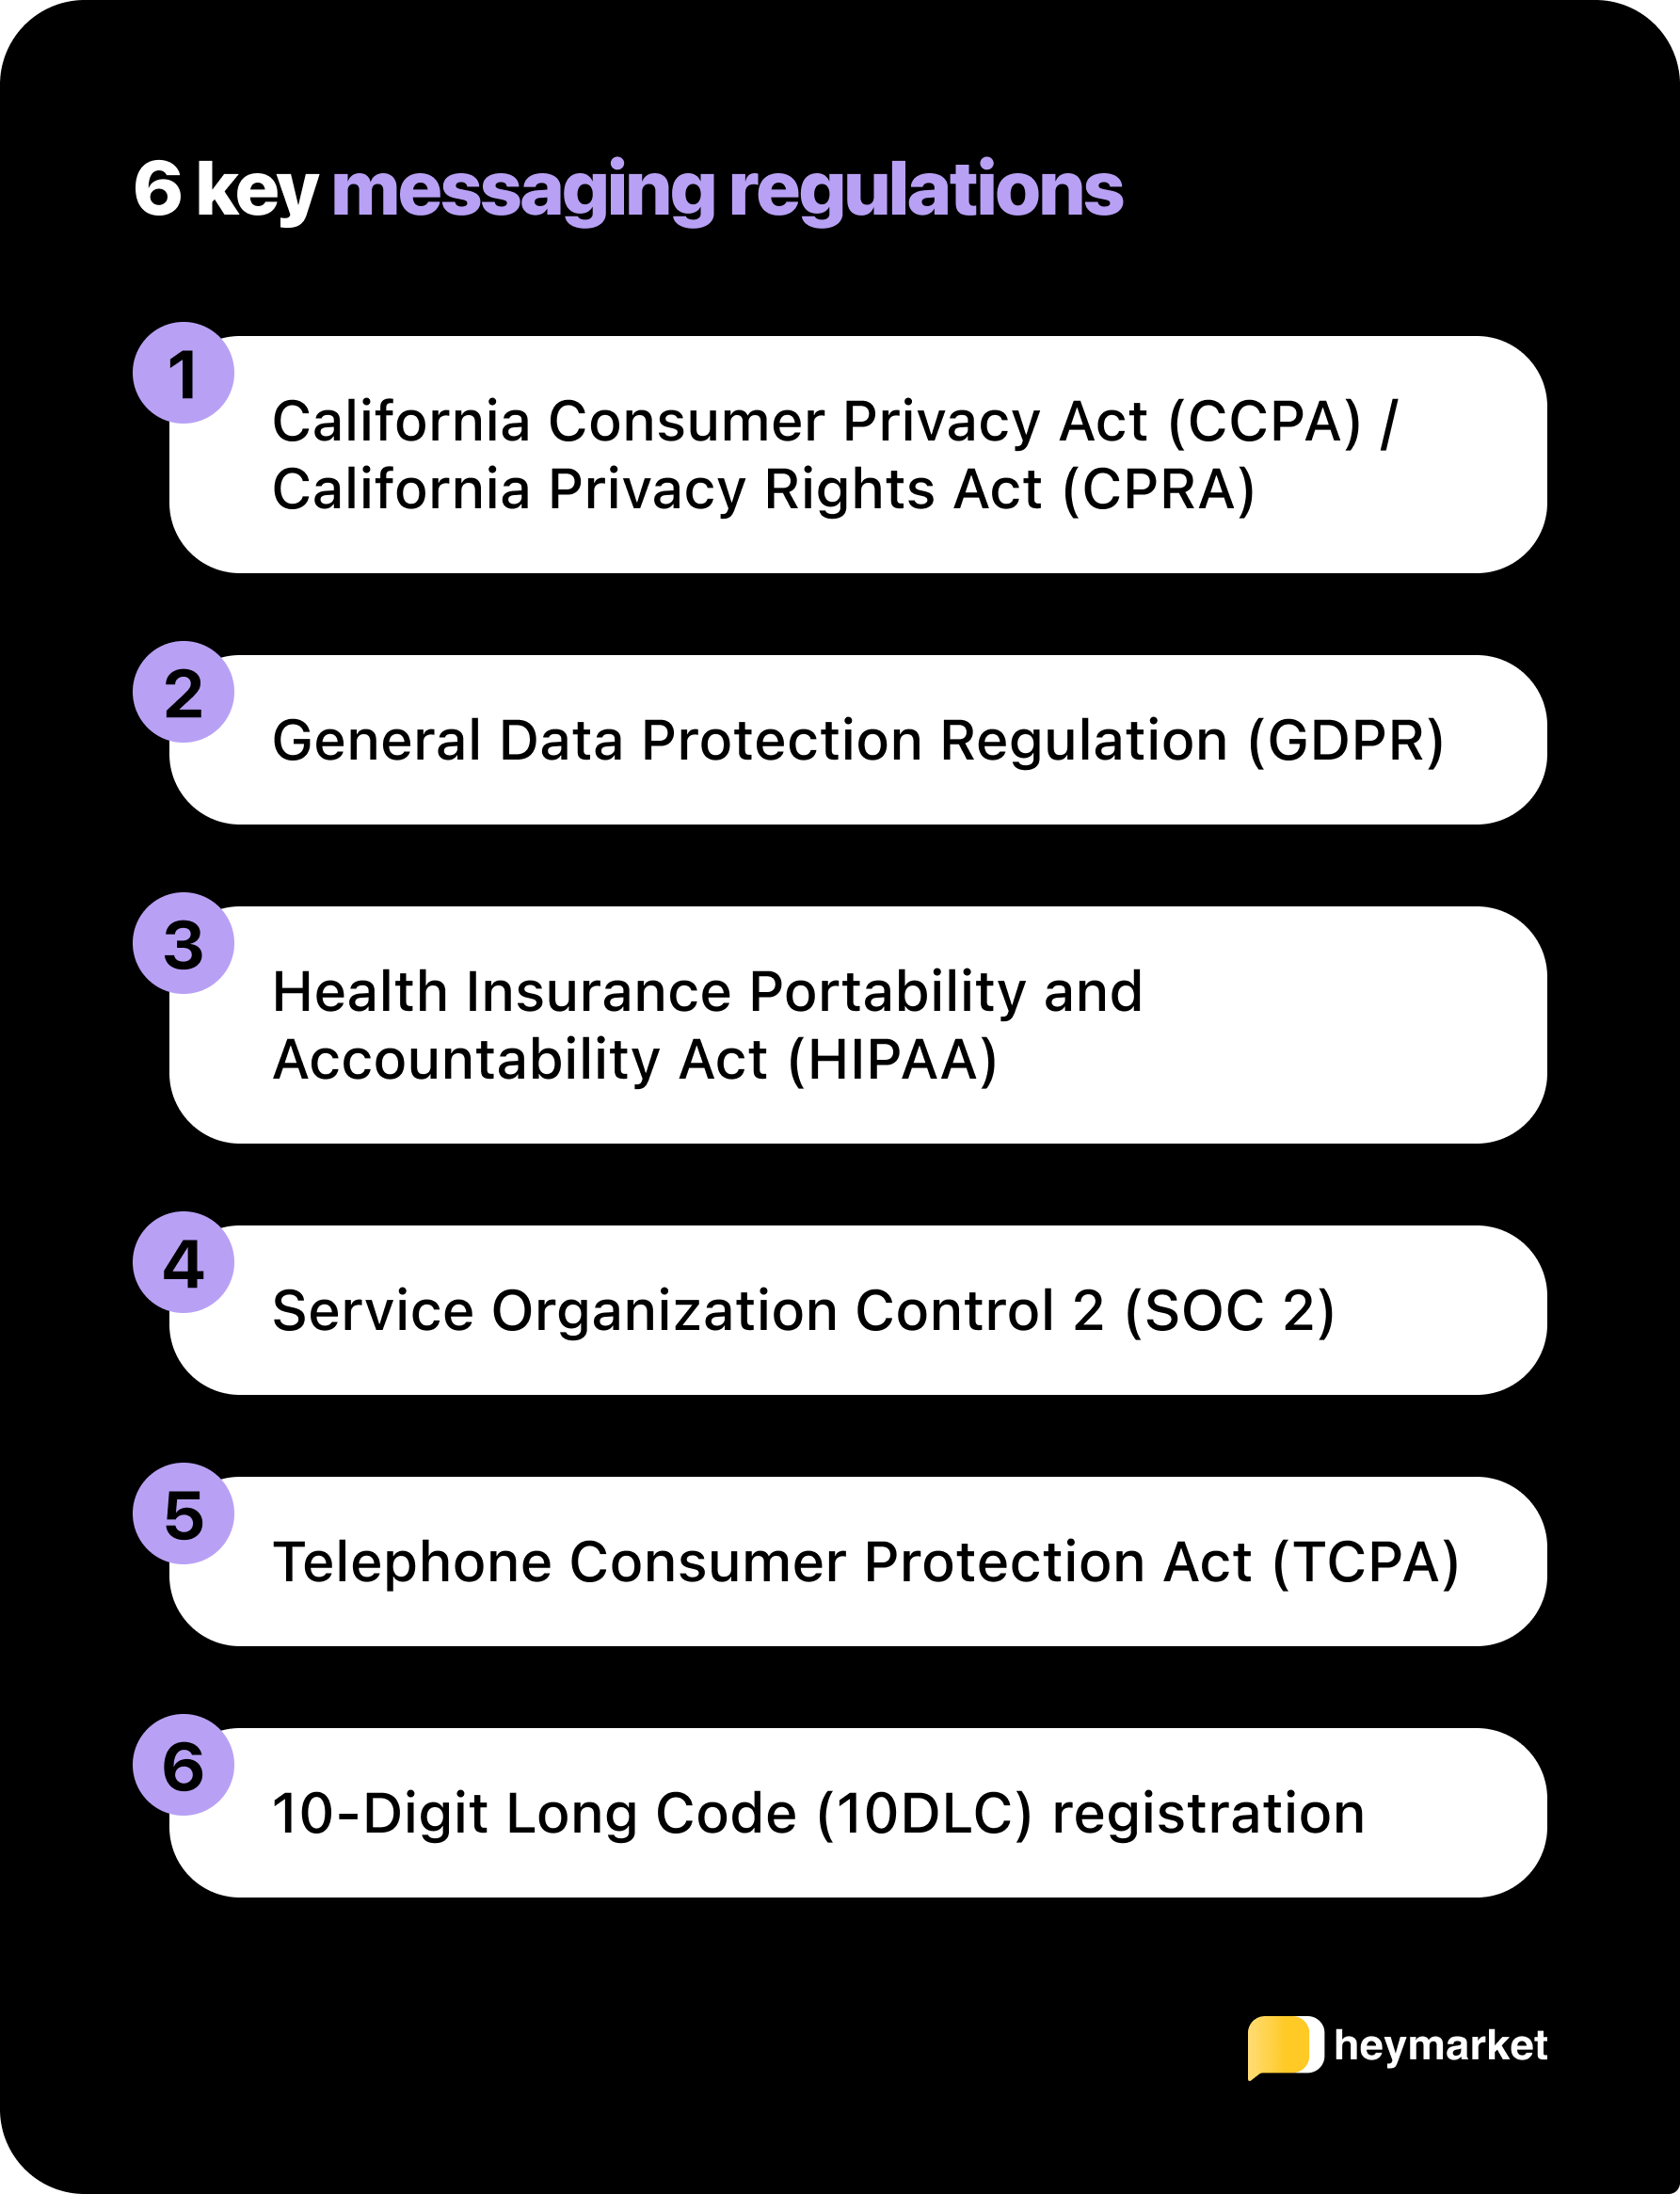 List of business texting regulations, including the Telephone Consumer Protection Act (TCPA) and General Data Protection Regulation (GDPR)